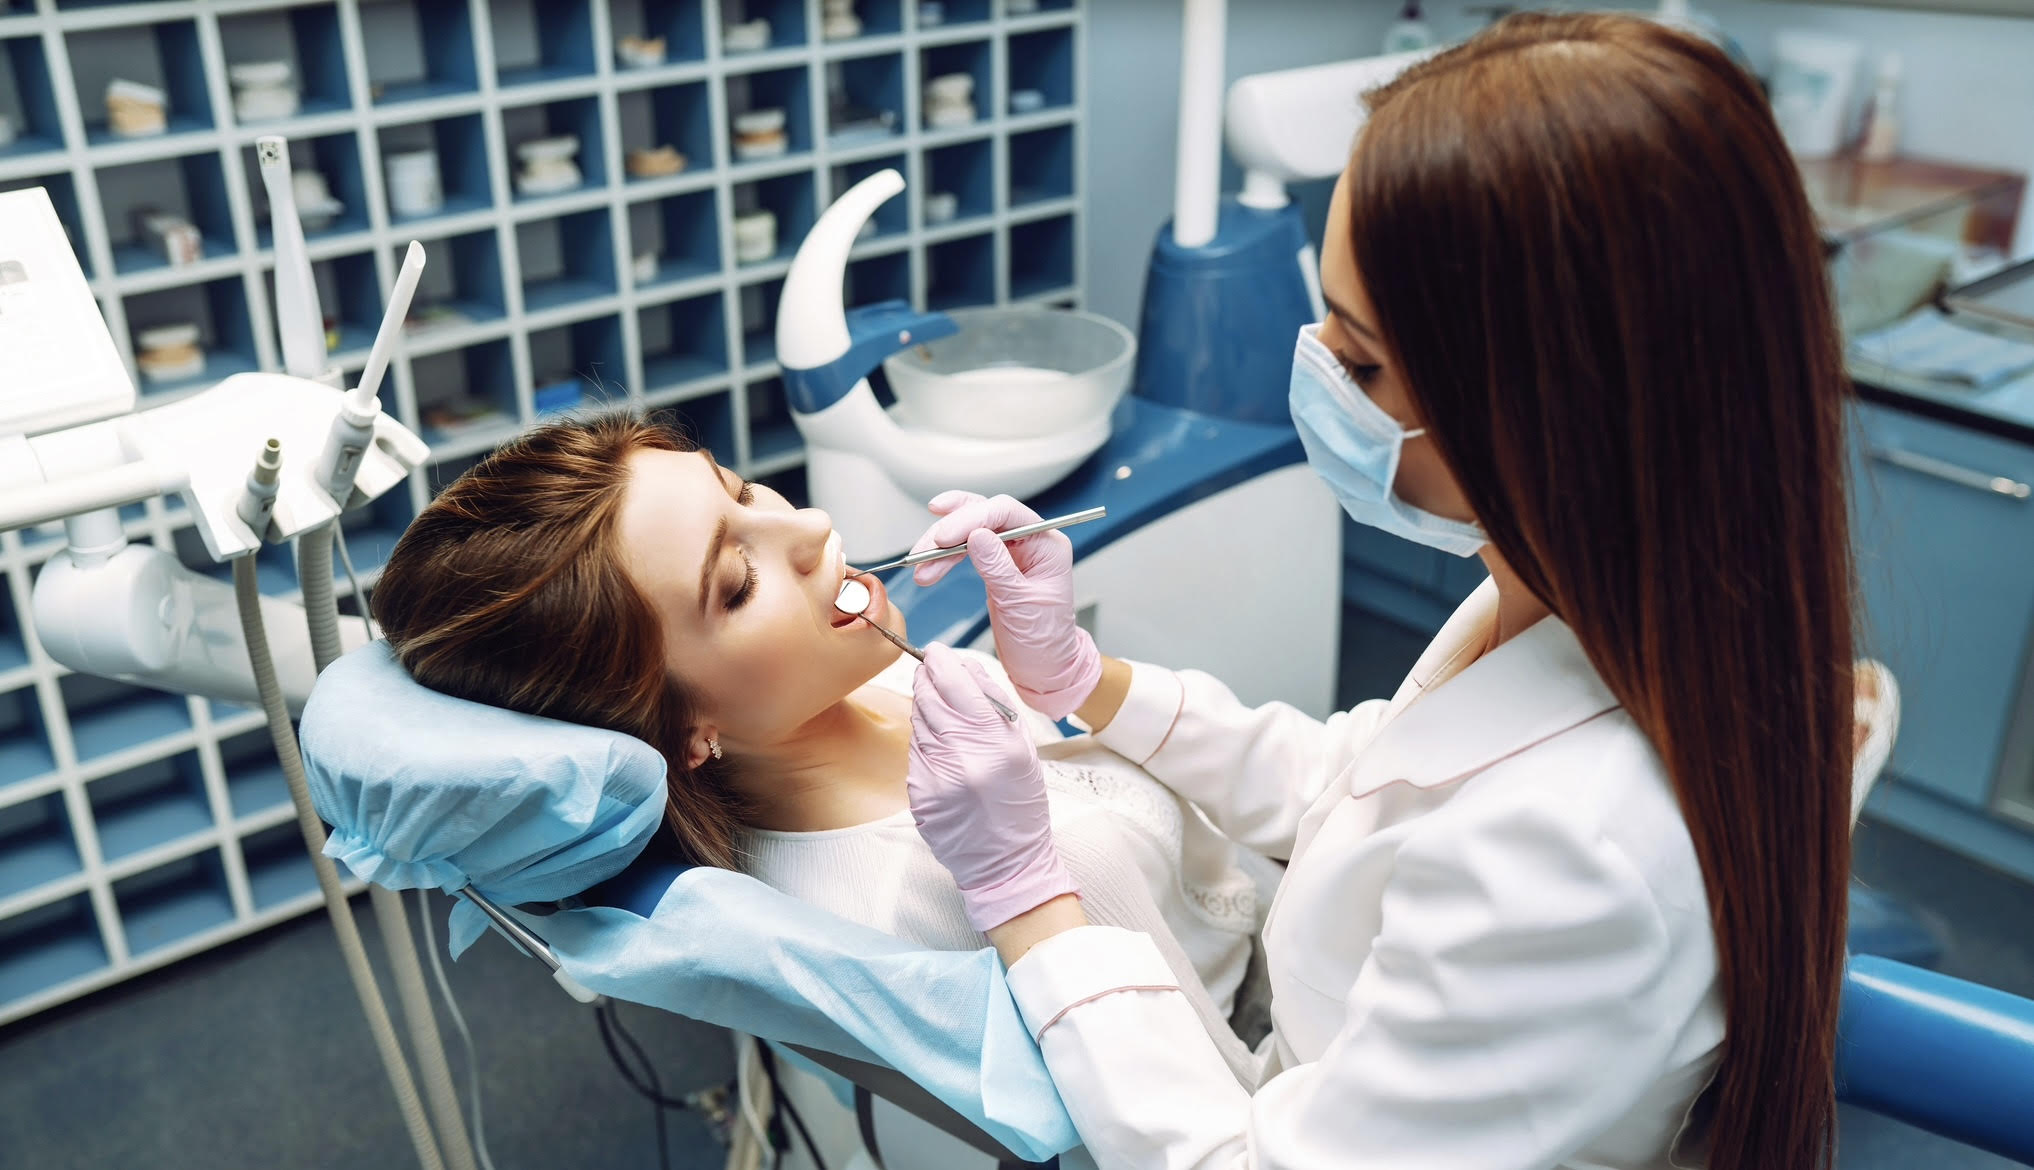 Kids under 18 and people with disabilities now covered by Canadian Dental Care Plan